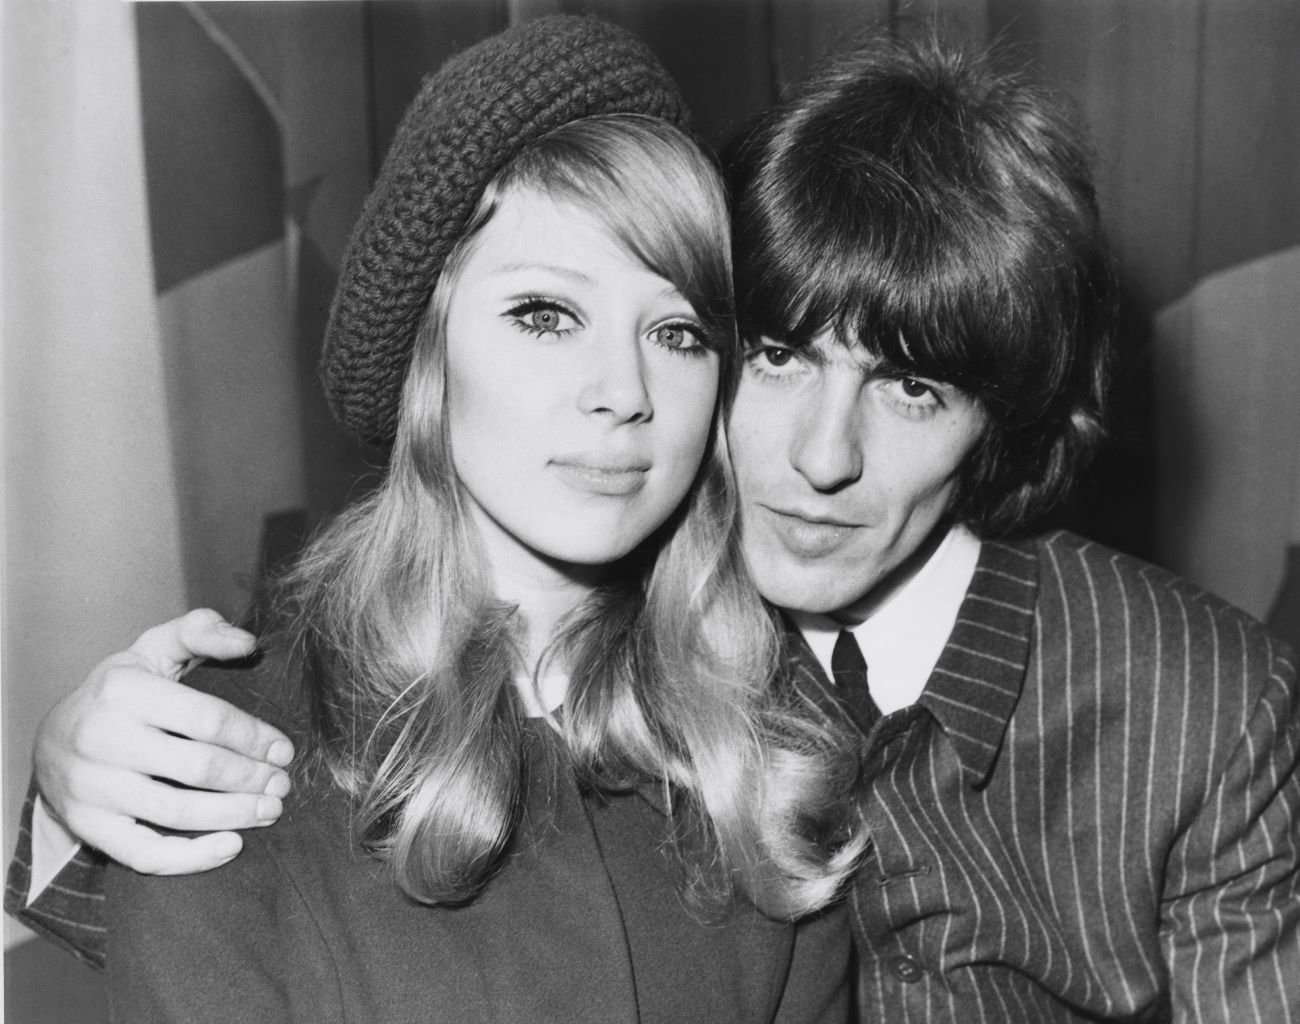 A black and white picture of George Harrison with his arm around his first wife Pattie Boyd.